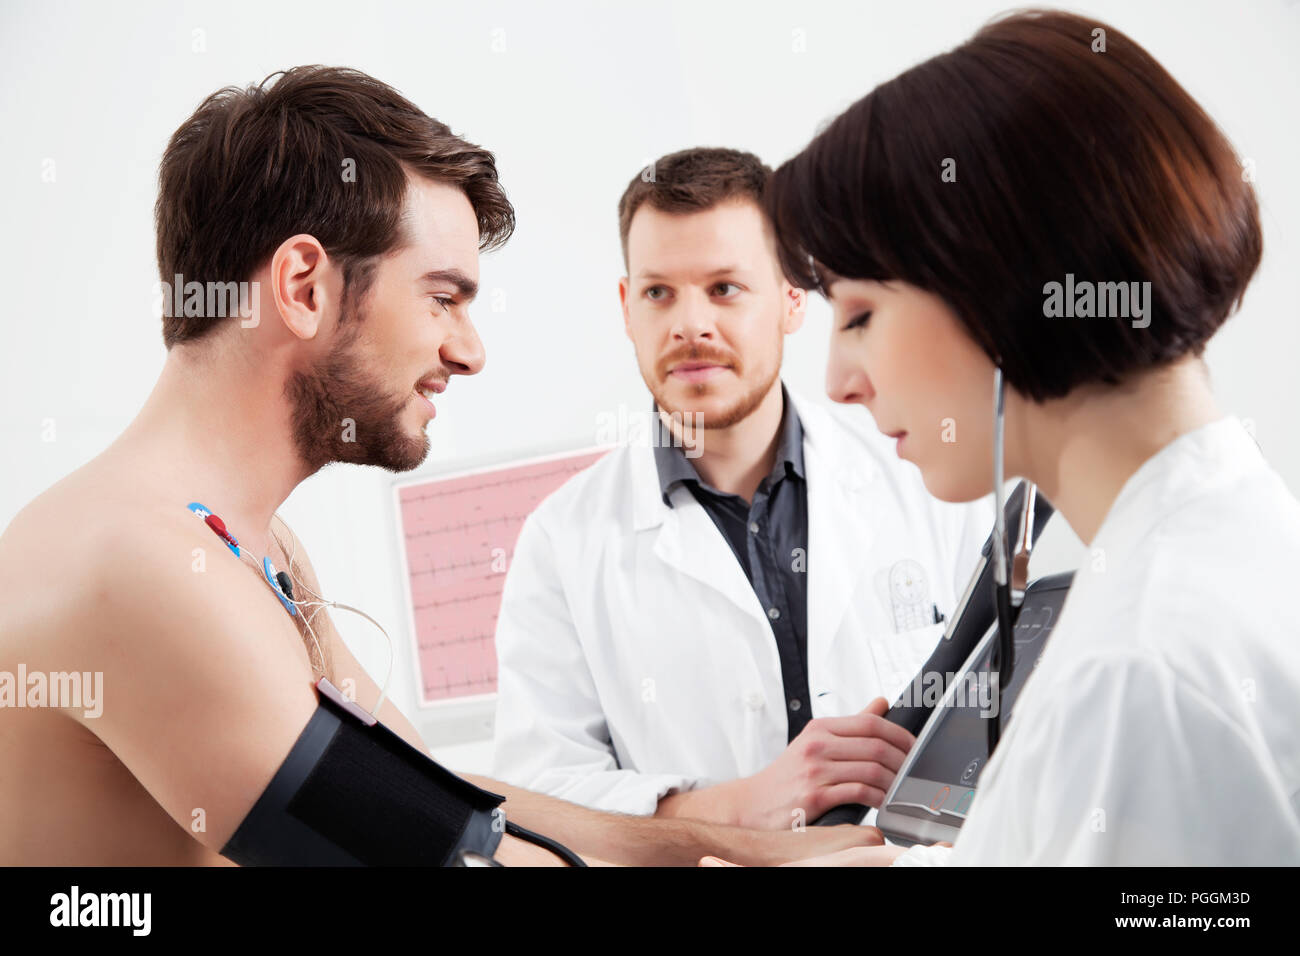 Cardiologist and nurse assist the patient during a cardiac stress test examination Stock Photo